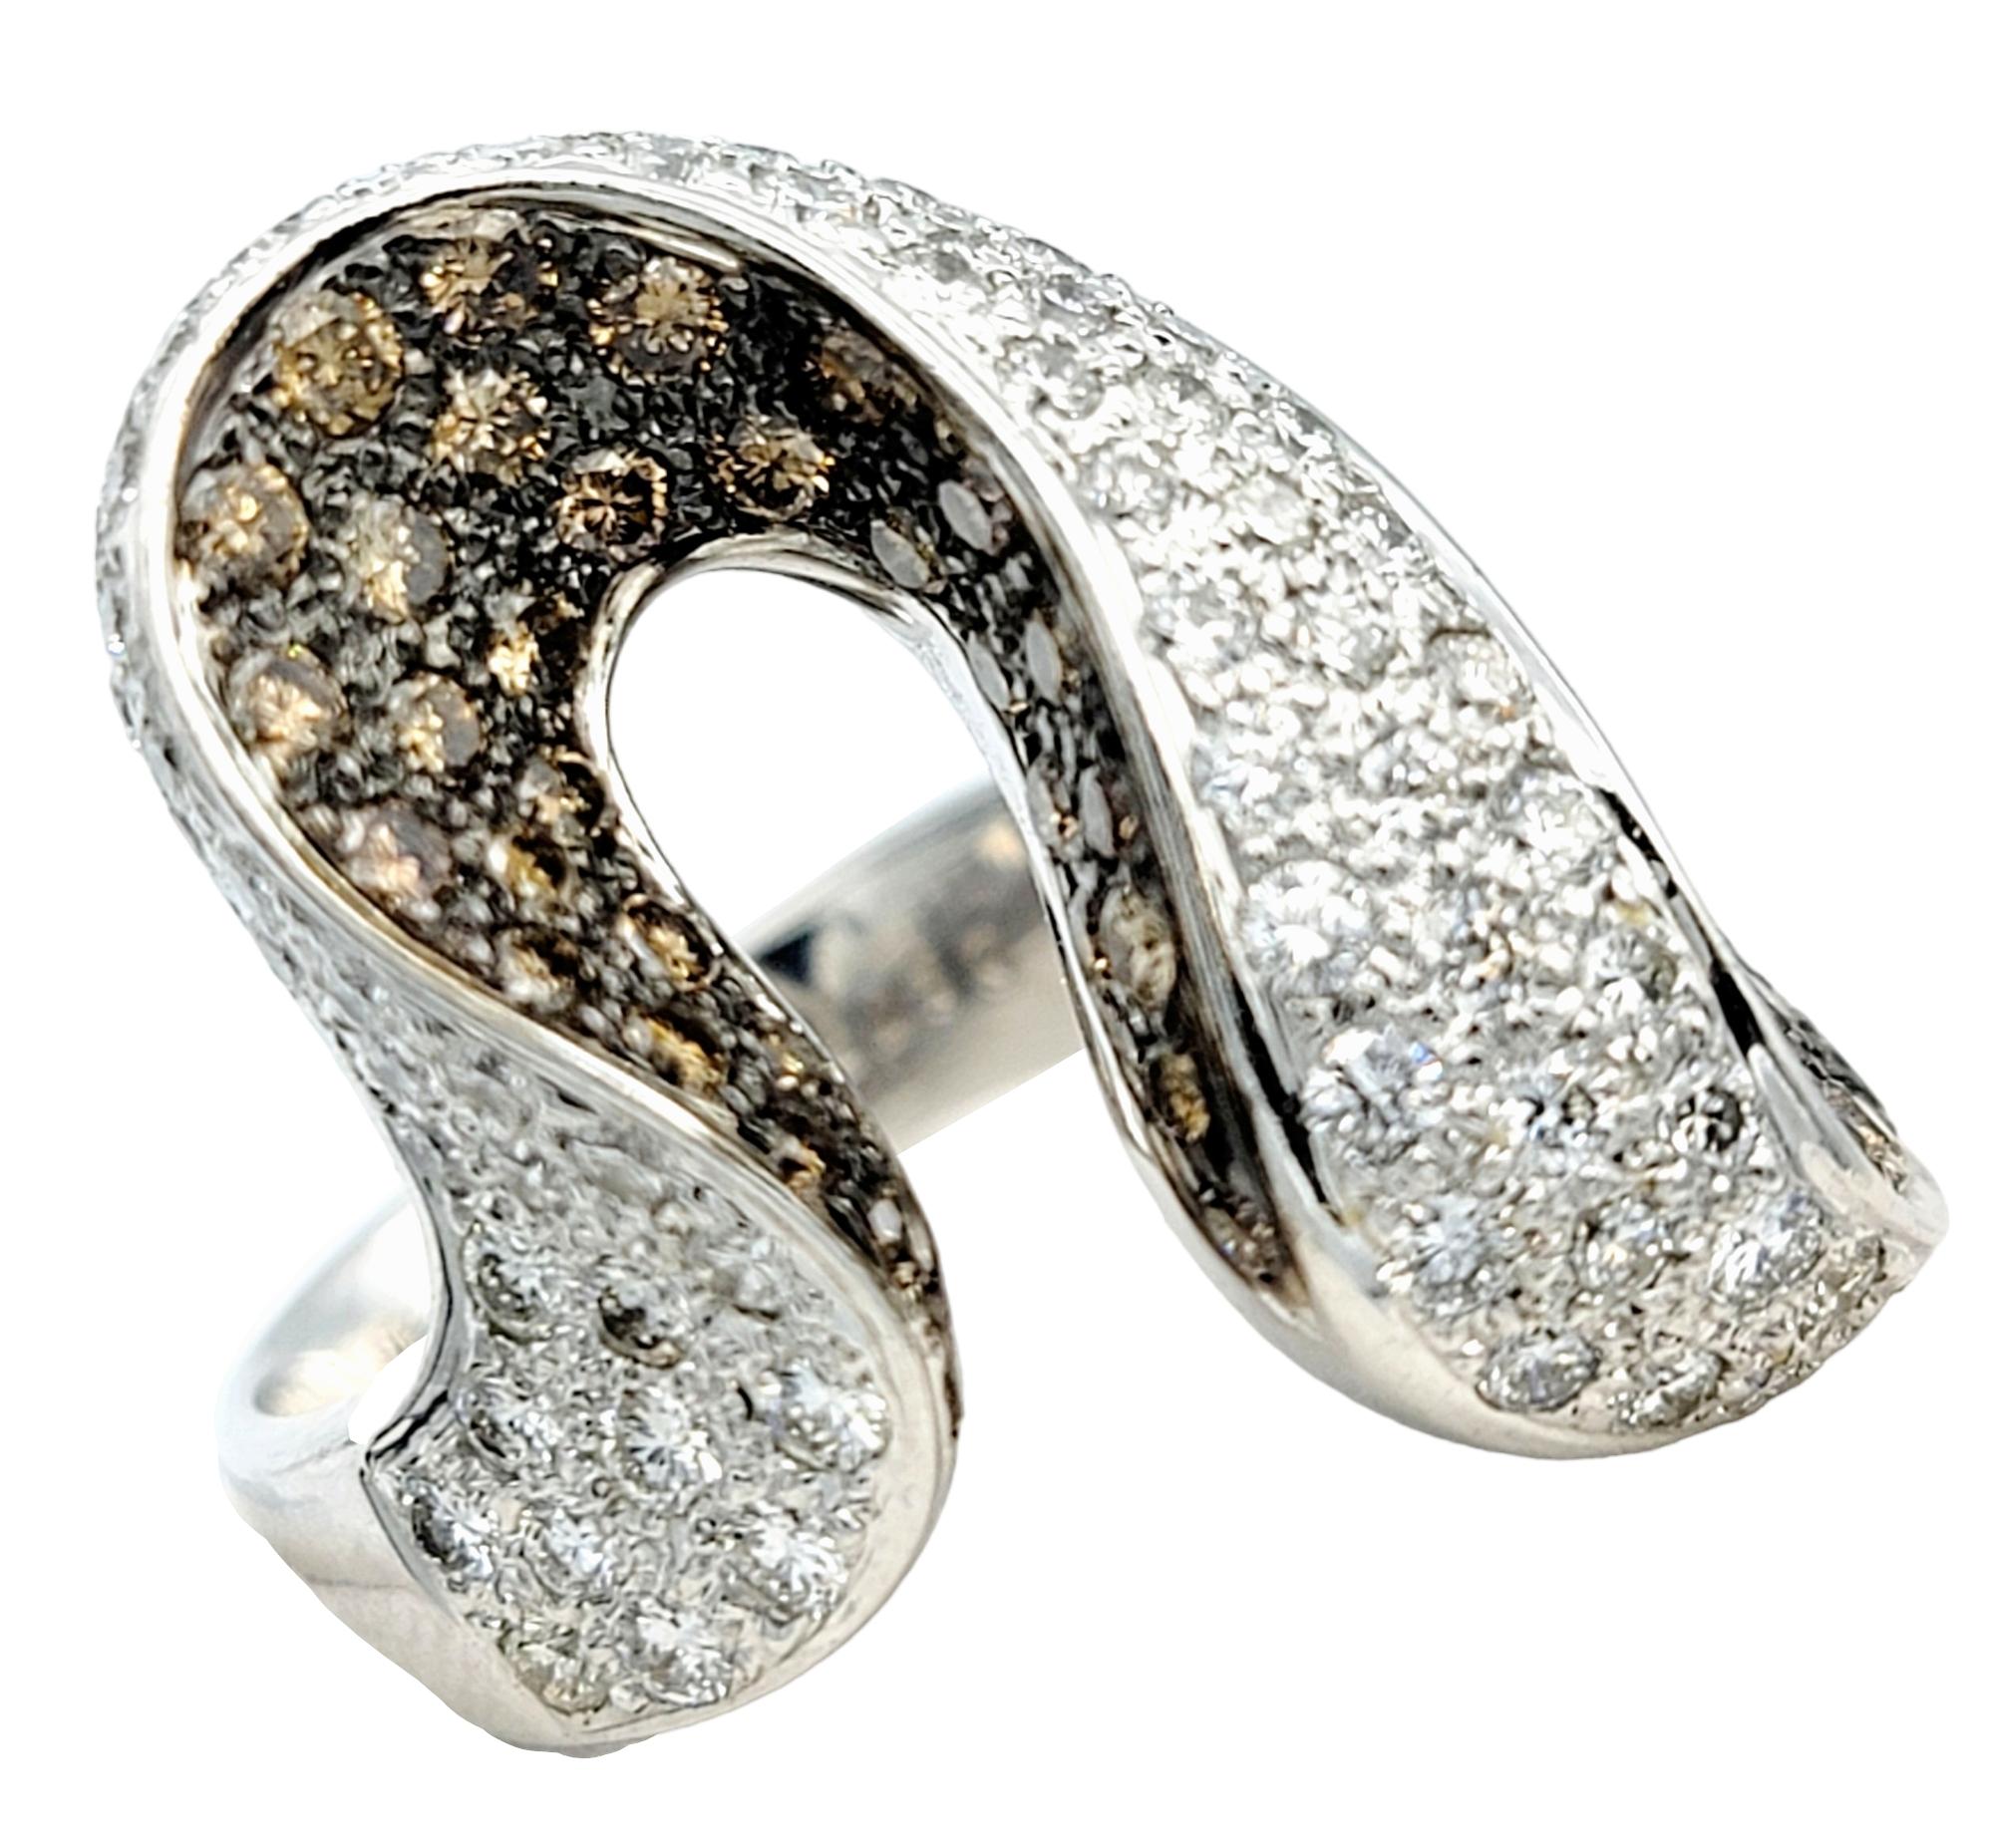 Ring size: 6.75

Shown here is a captivating masterpiece that seamlessly blends modern design with timeless luxury - our contemporary pave diamond asymmetric swirl cocktail ring. Crafted in luxurious 18 karat white gold, this ring is a striking